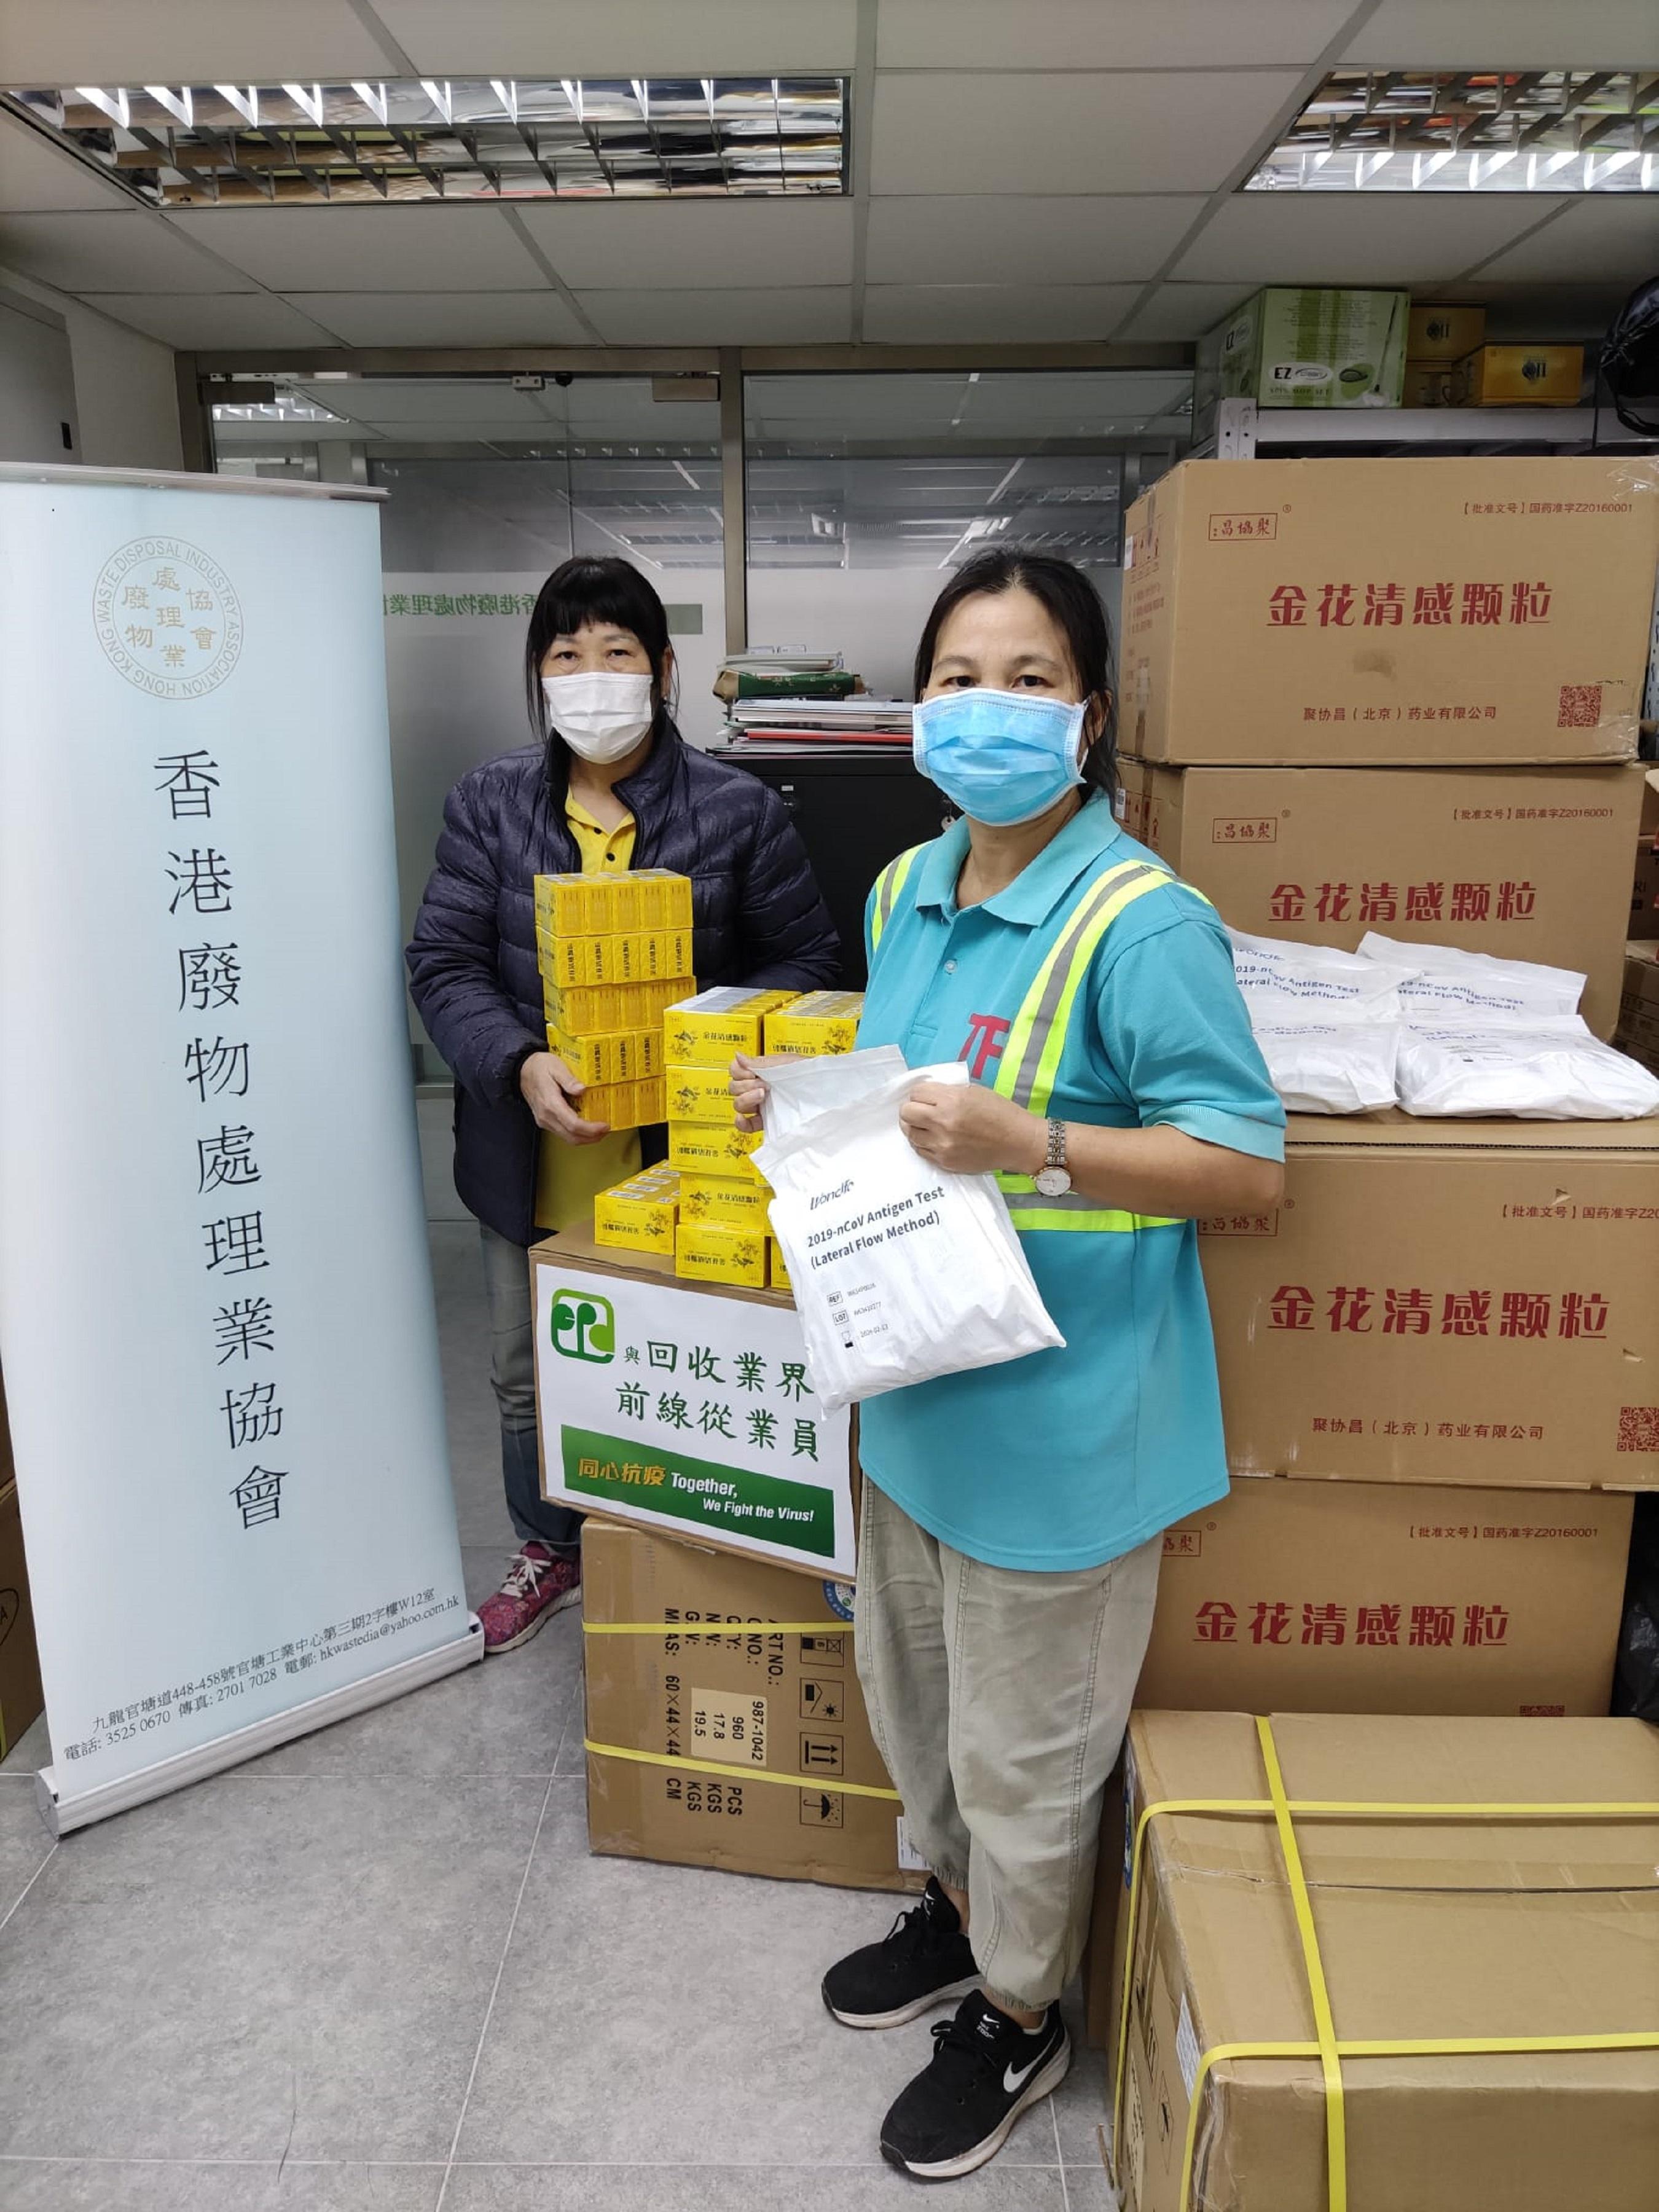 The Environmental Protection Department (EPD) has distributed a total of about 24 000 rapid antigen test (RAT) kits and 24 000 boxes of anti-epidemic proprietary Chinese medicines donated by the Central Government to various recycling trade associations and recycling service contractors, so as to provide anti-epidemic support to the frontline staff. Picture shows frontline recycling staff receiving RAT kits and anti-epidemic proprietary Chinese medicines distributed by the EPD.